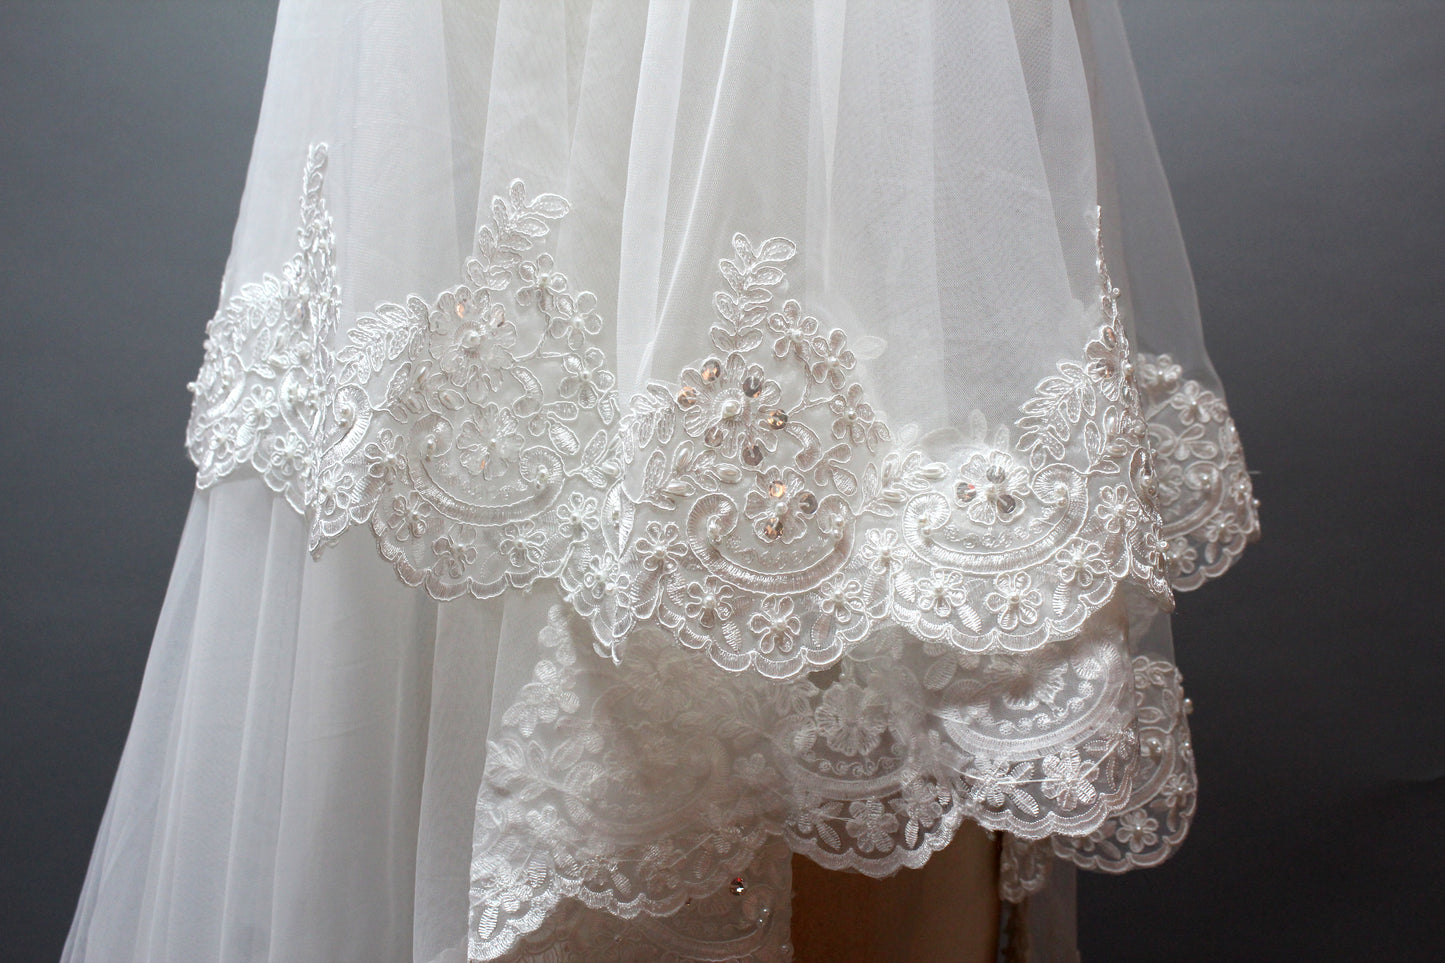 Enchanting Lace Veil - Adding Romance and Elegance to Your Wedding